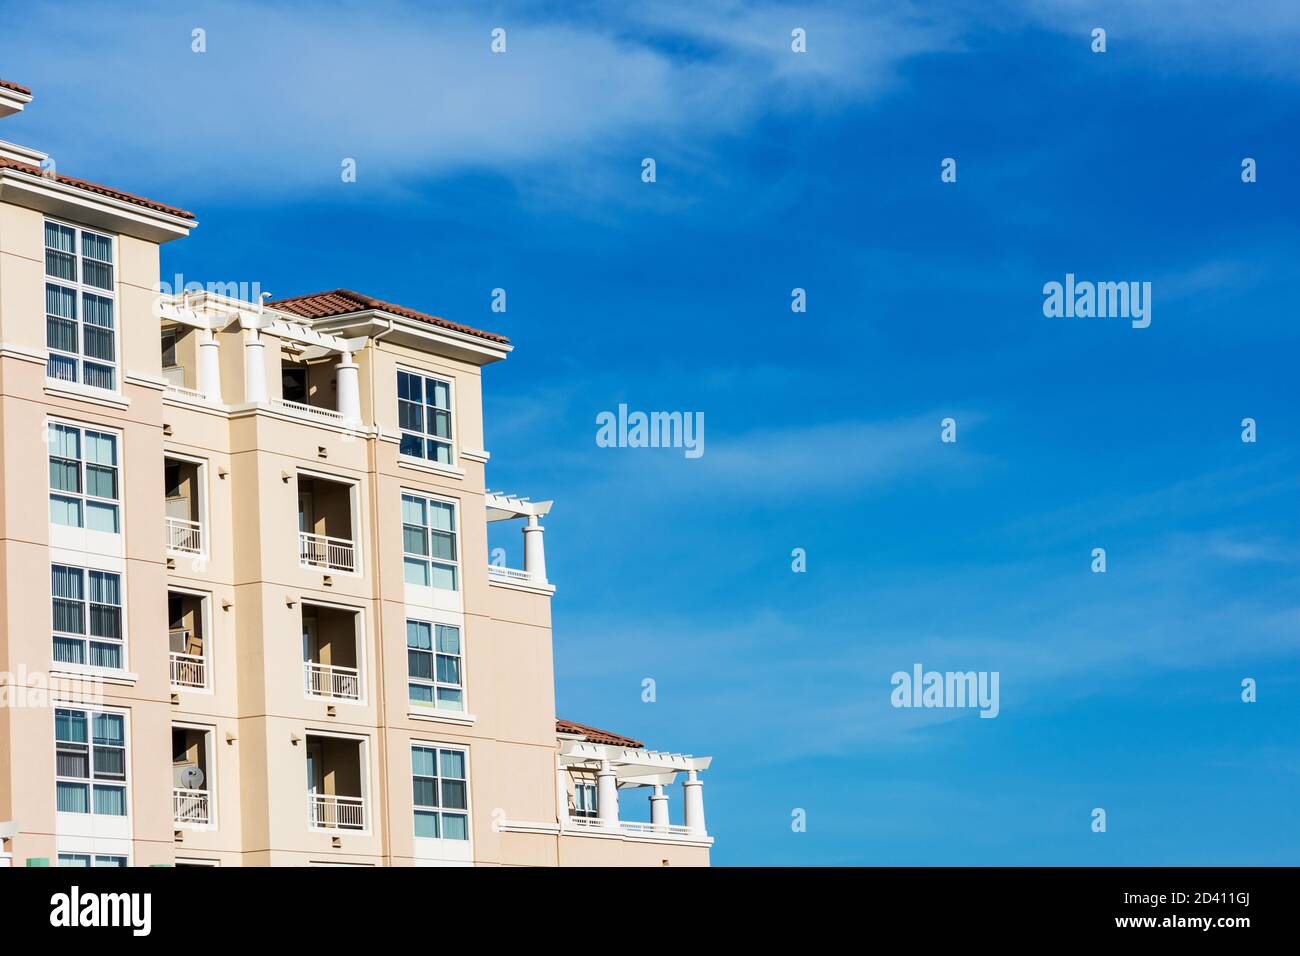 Exterior view of typical modern high rise multifamily residential building under blue sky. Stock Photo